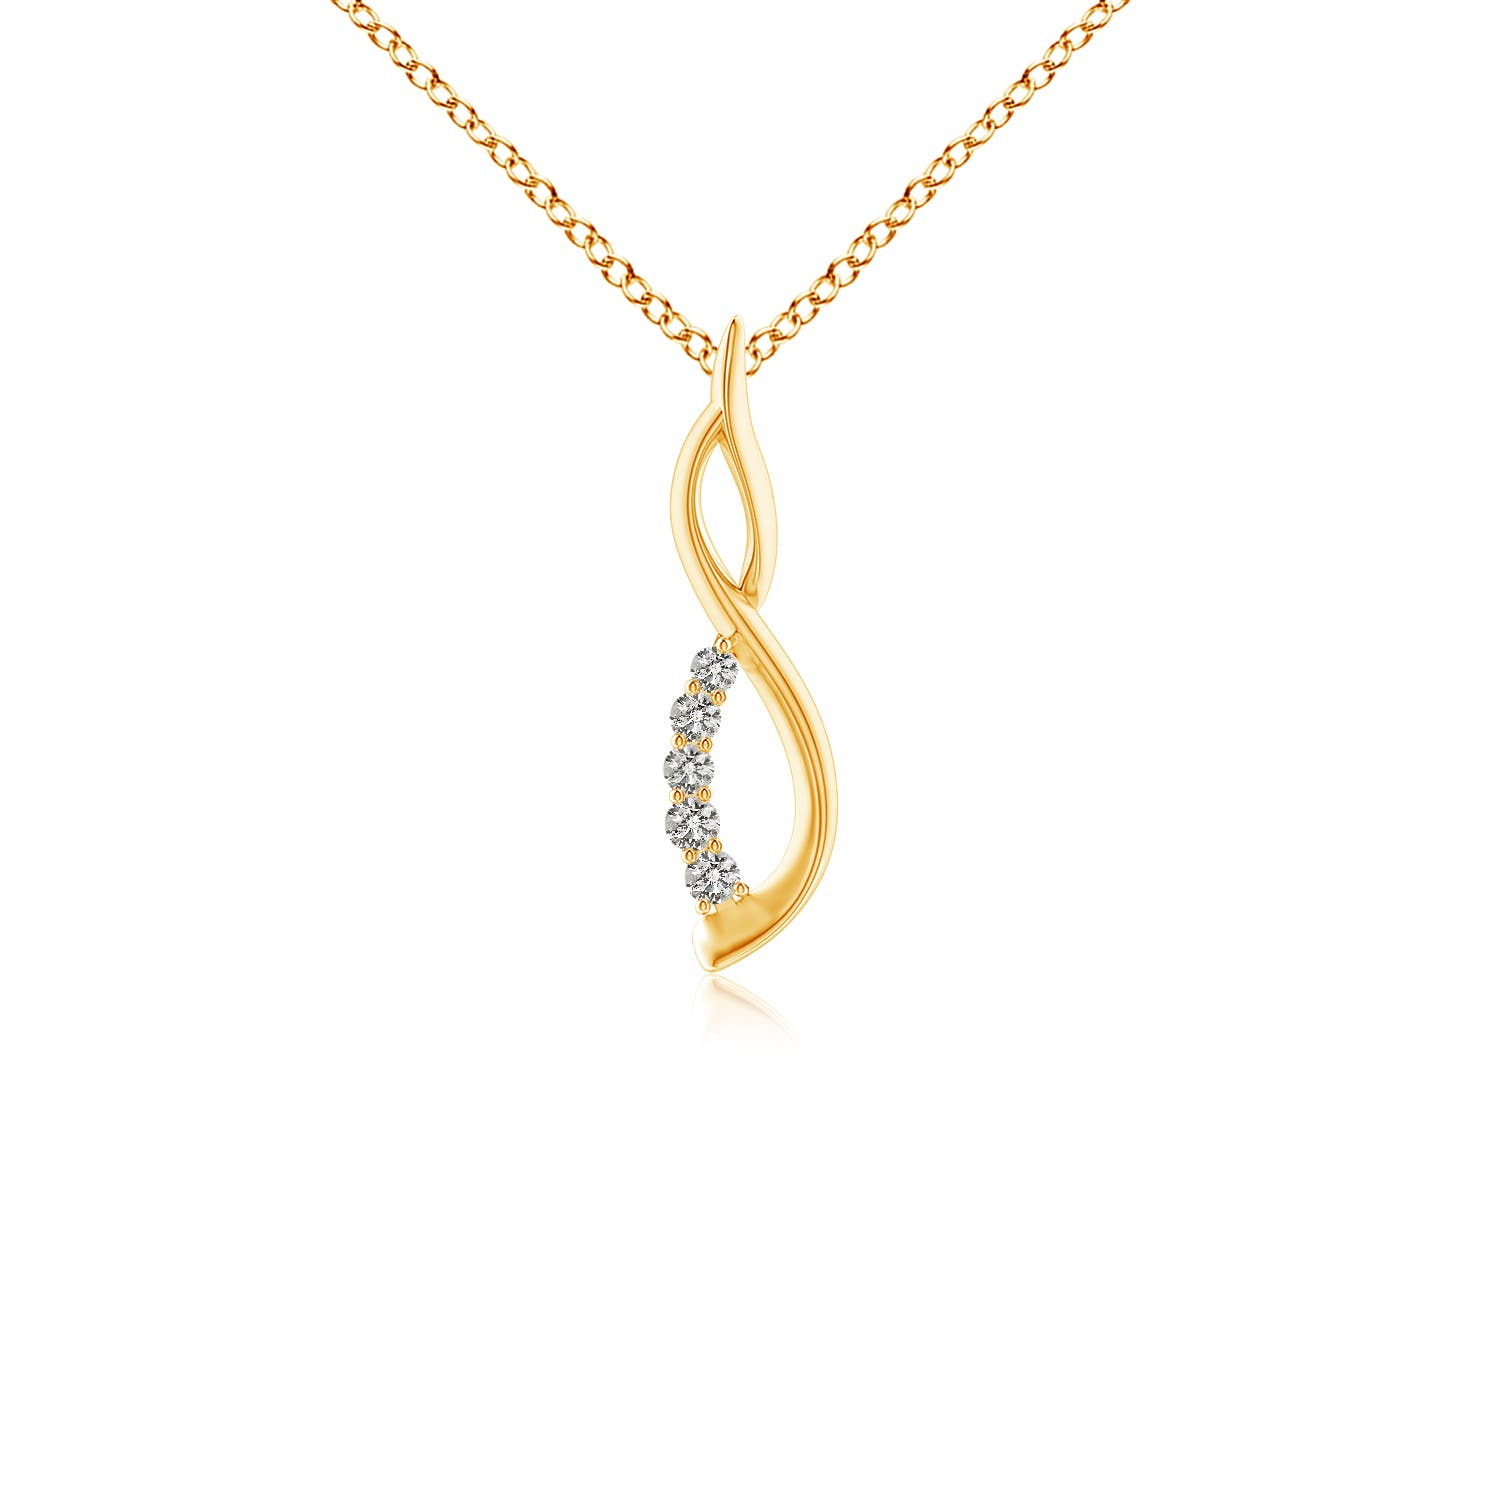 K, I3 / 0.05 CT / 14 KT Yellow Gold